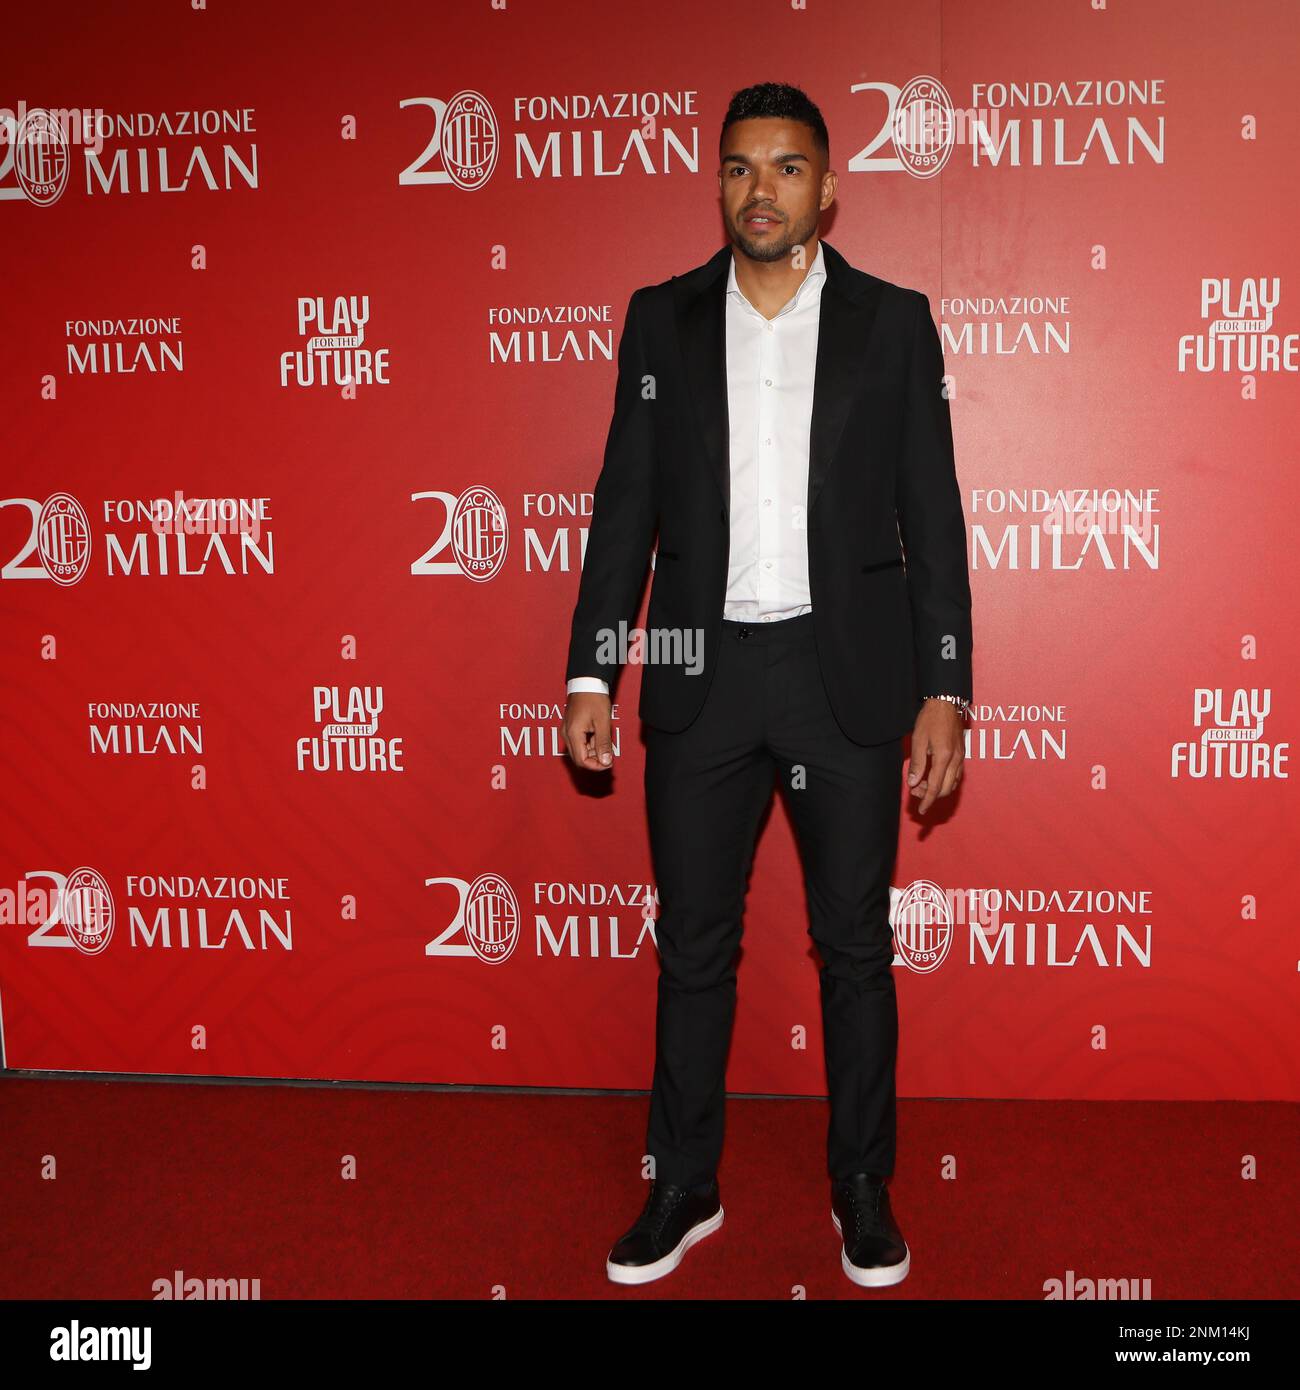 Milan, Italy. 23rd Feb, 2023. AC Milan forward Junior Messias of Brazil attends the Gala Dinner held to celebrate the 20th Anniversary of the Fondazione Milan in Milan, Italy Credit: Mickael Chavet/Alamy Live News Stock Photo